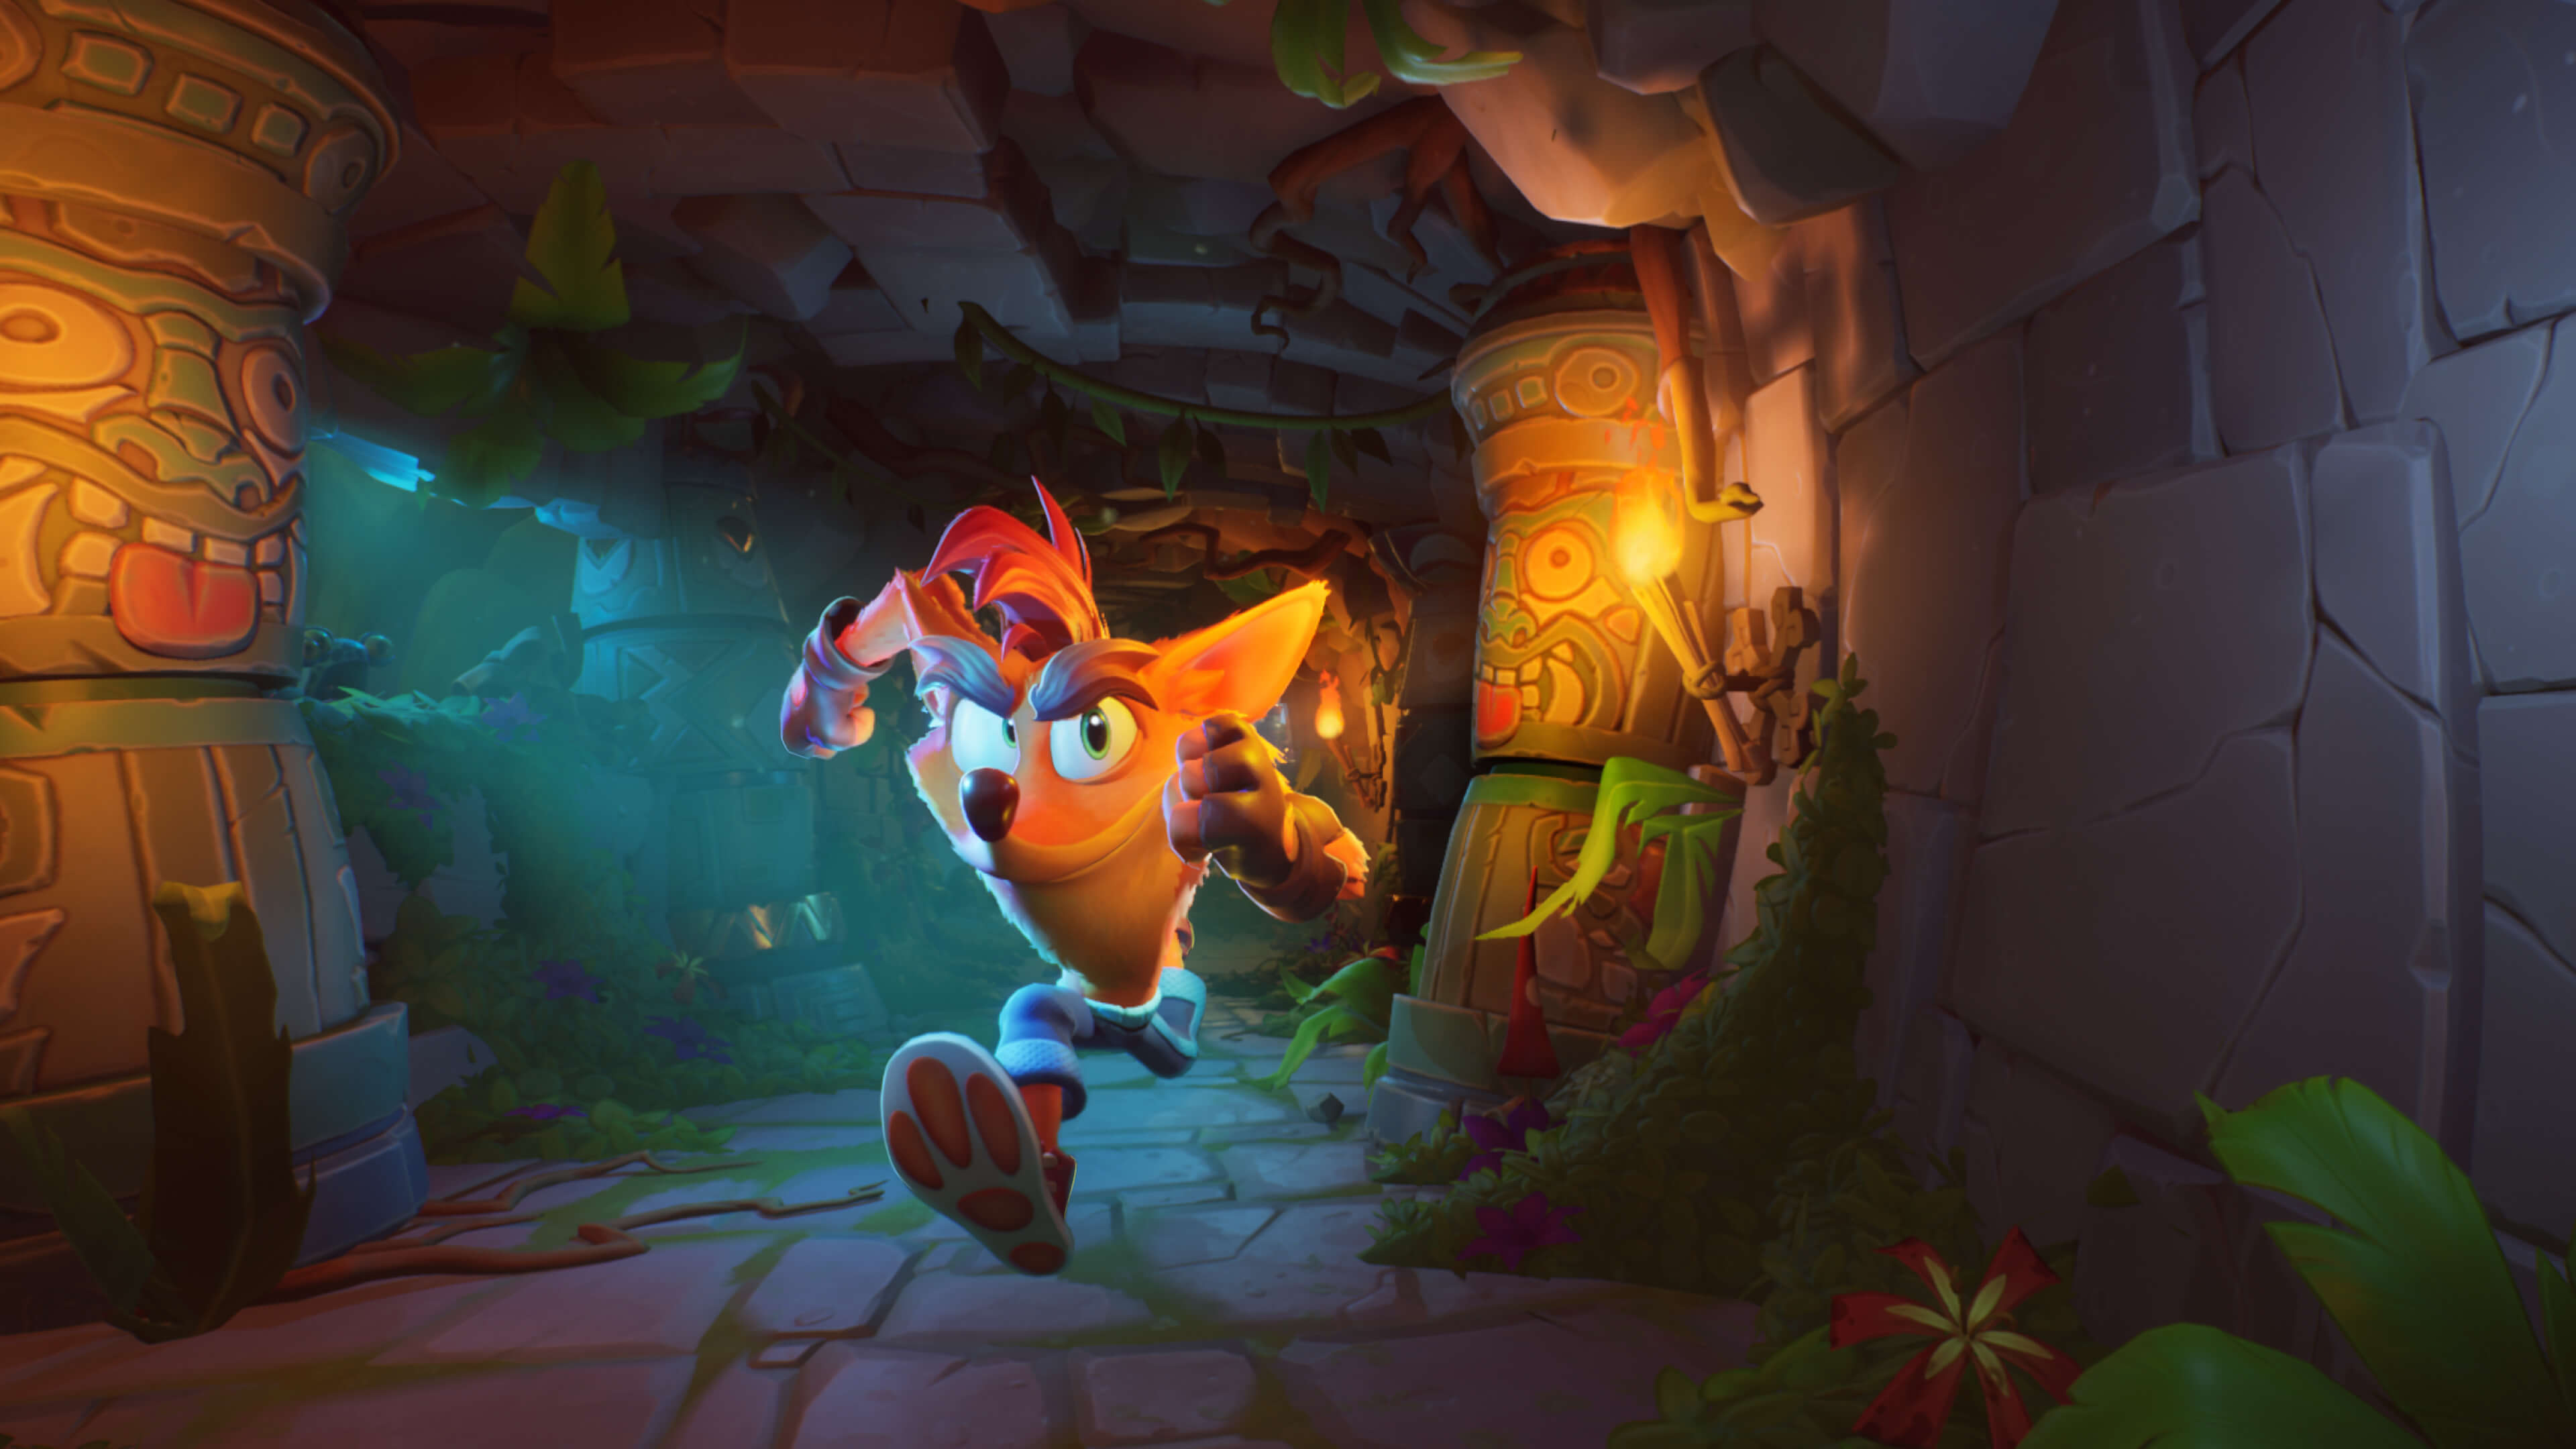 Crash Bandicoot 4: It's About Time review